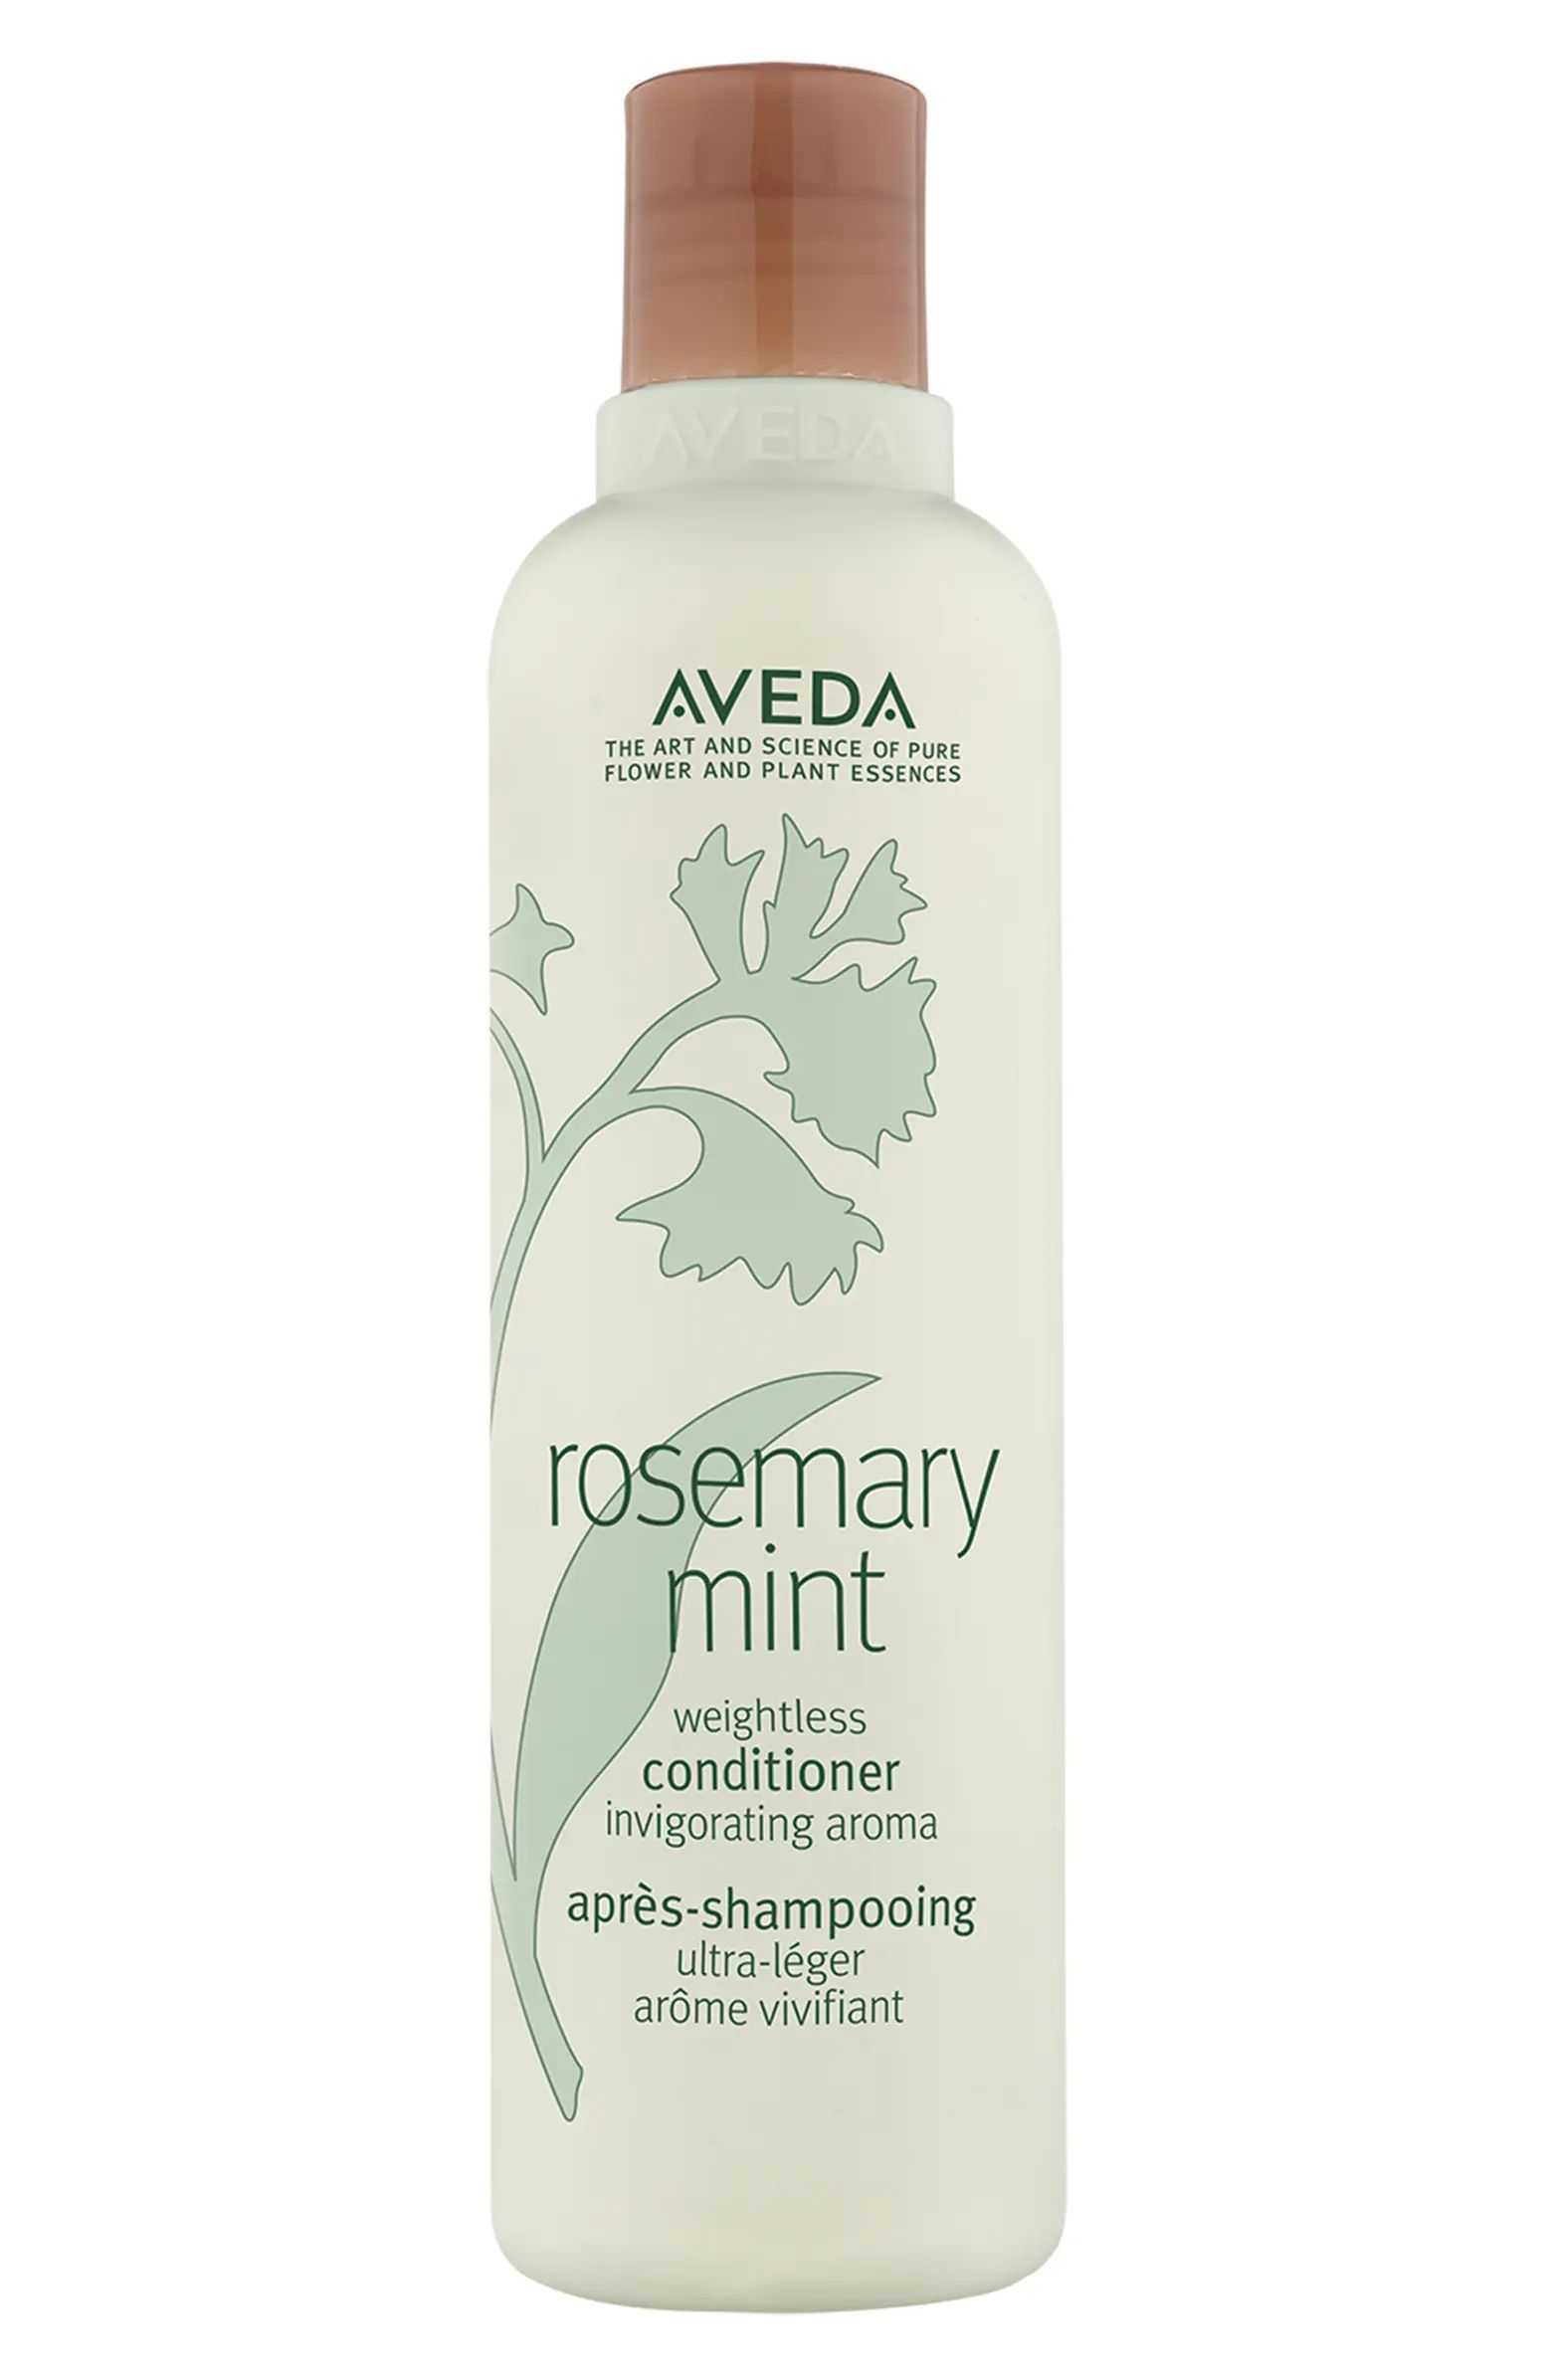 Rosemary Mint Weightless Conditioner | Nordstrom